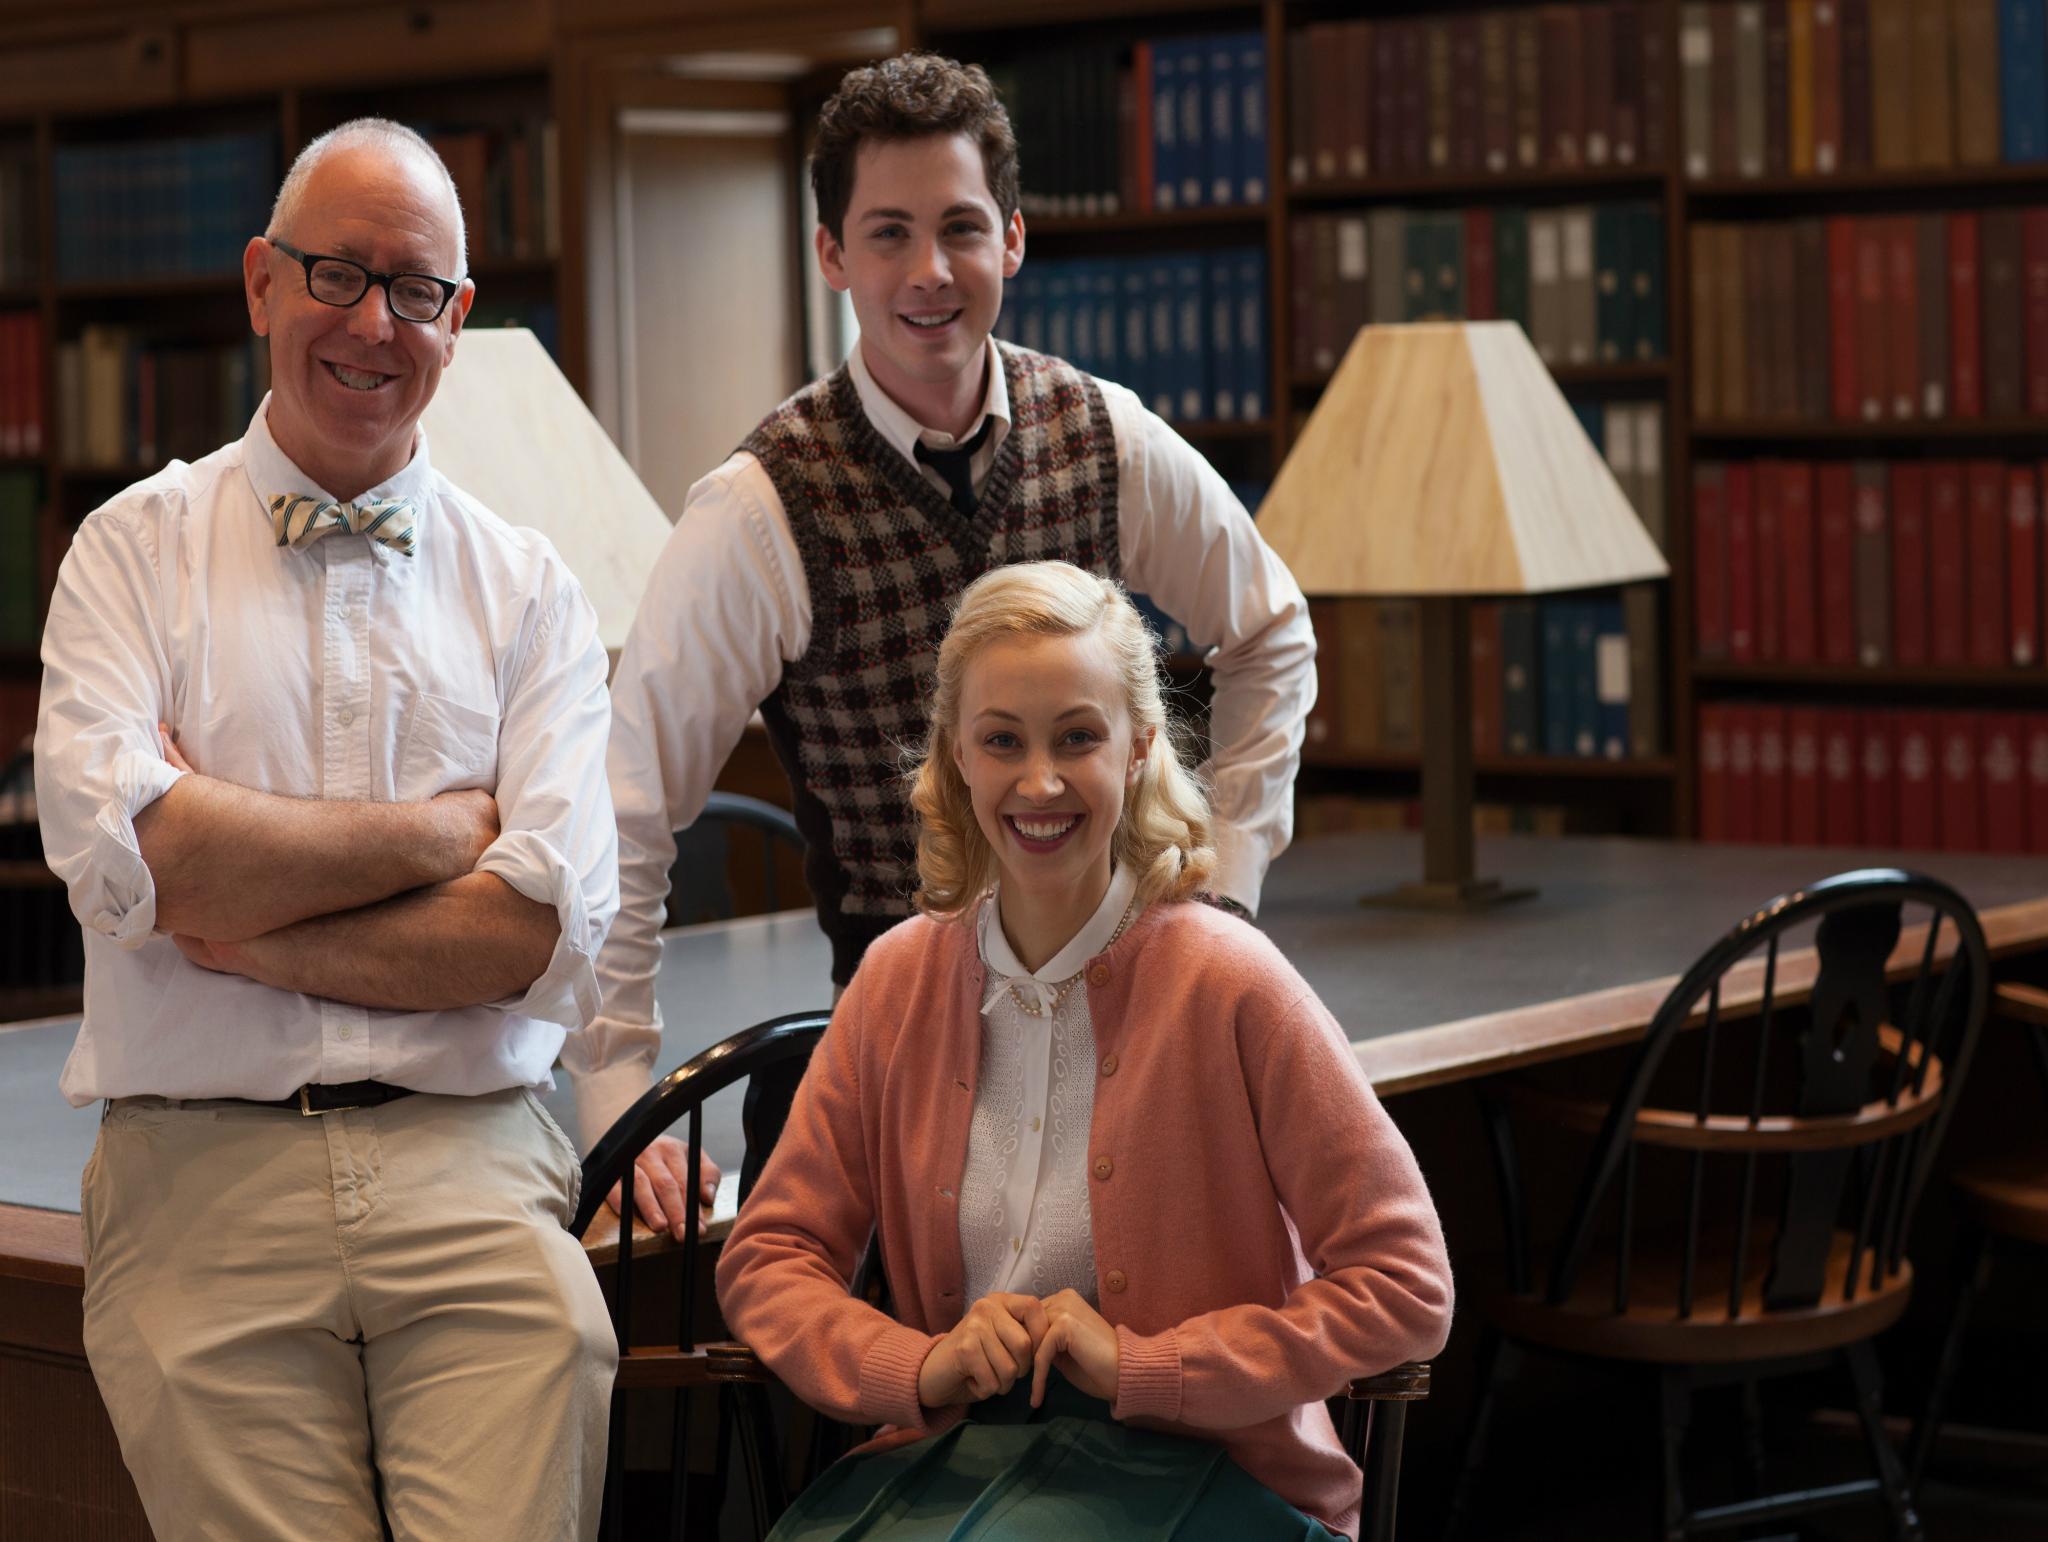 'Indignation' director Schamus poses with the cast: Logan Lerman plays a Jewish college student who falls for a young woman, played by Sarah Gadon